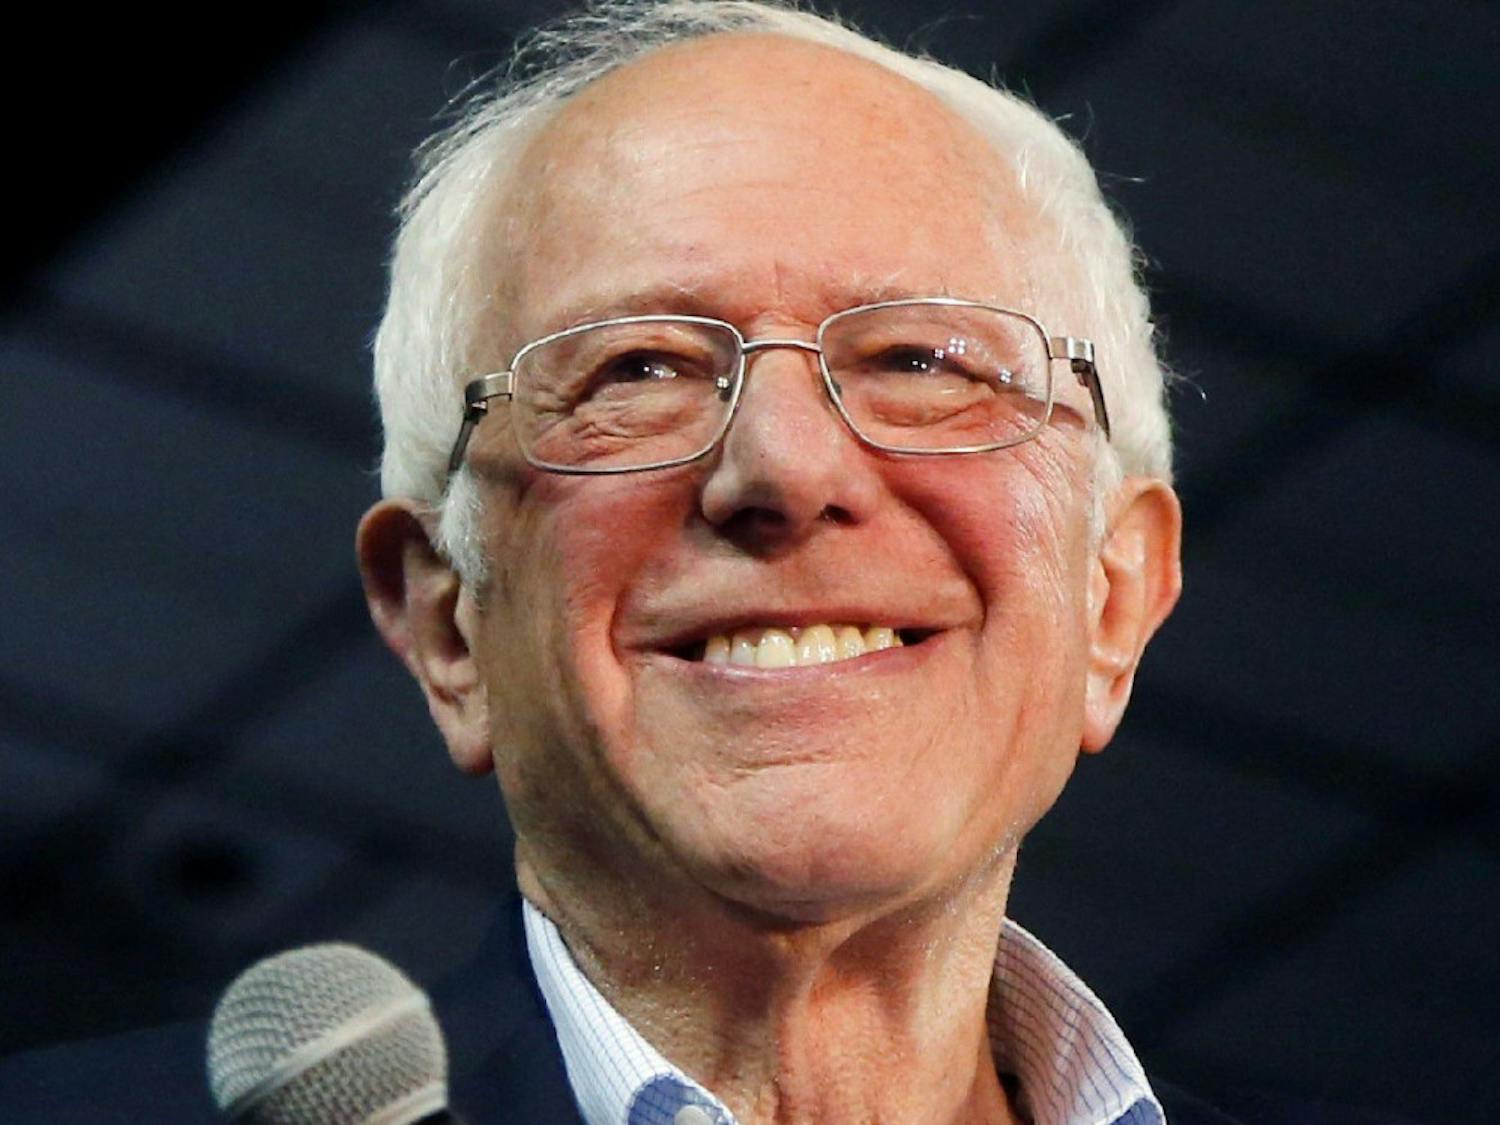 Democratic presidential candidate Sen. Bernie Sanders, I-Vt., smiles as he walks on stage to applause at a campaign rally Thursday, March 5, 2020, in Phoenix. (AP Photo/Ross D. Franklin)